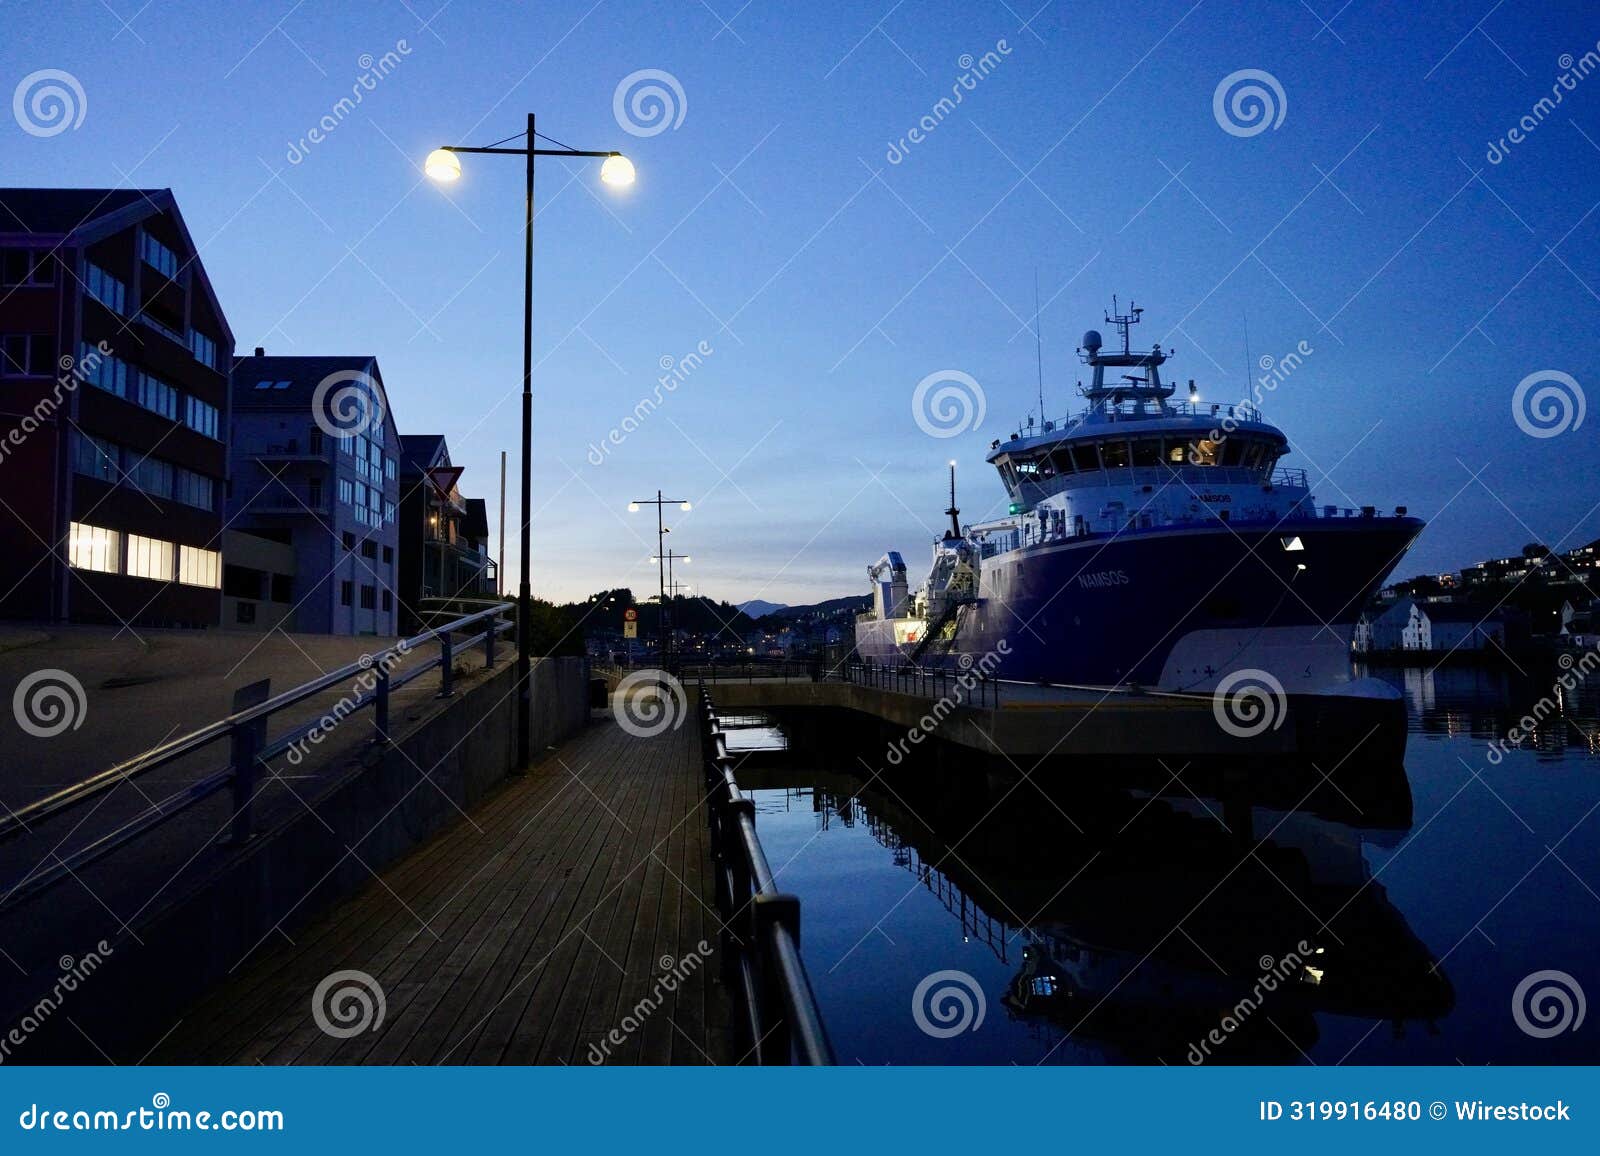 ship docked at the port city of kristiansund, norway.